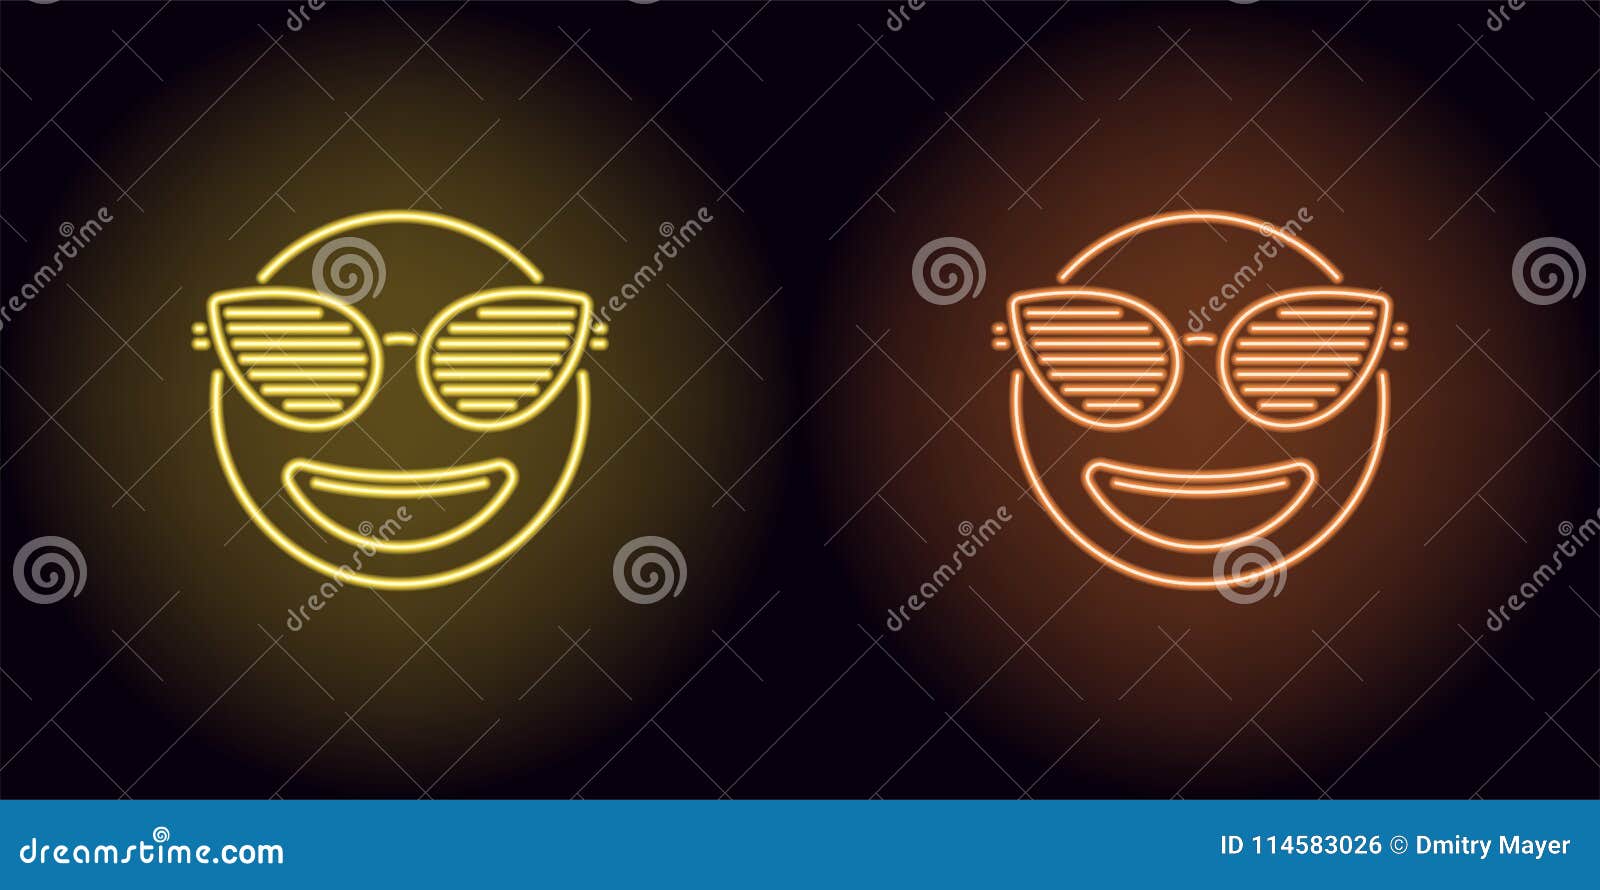 Neon stylish emoji in yellow and orange color. Vector illustration of neon emoji with fashionable club glasses, with backlight on the dark background